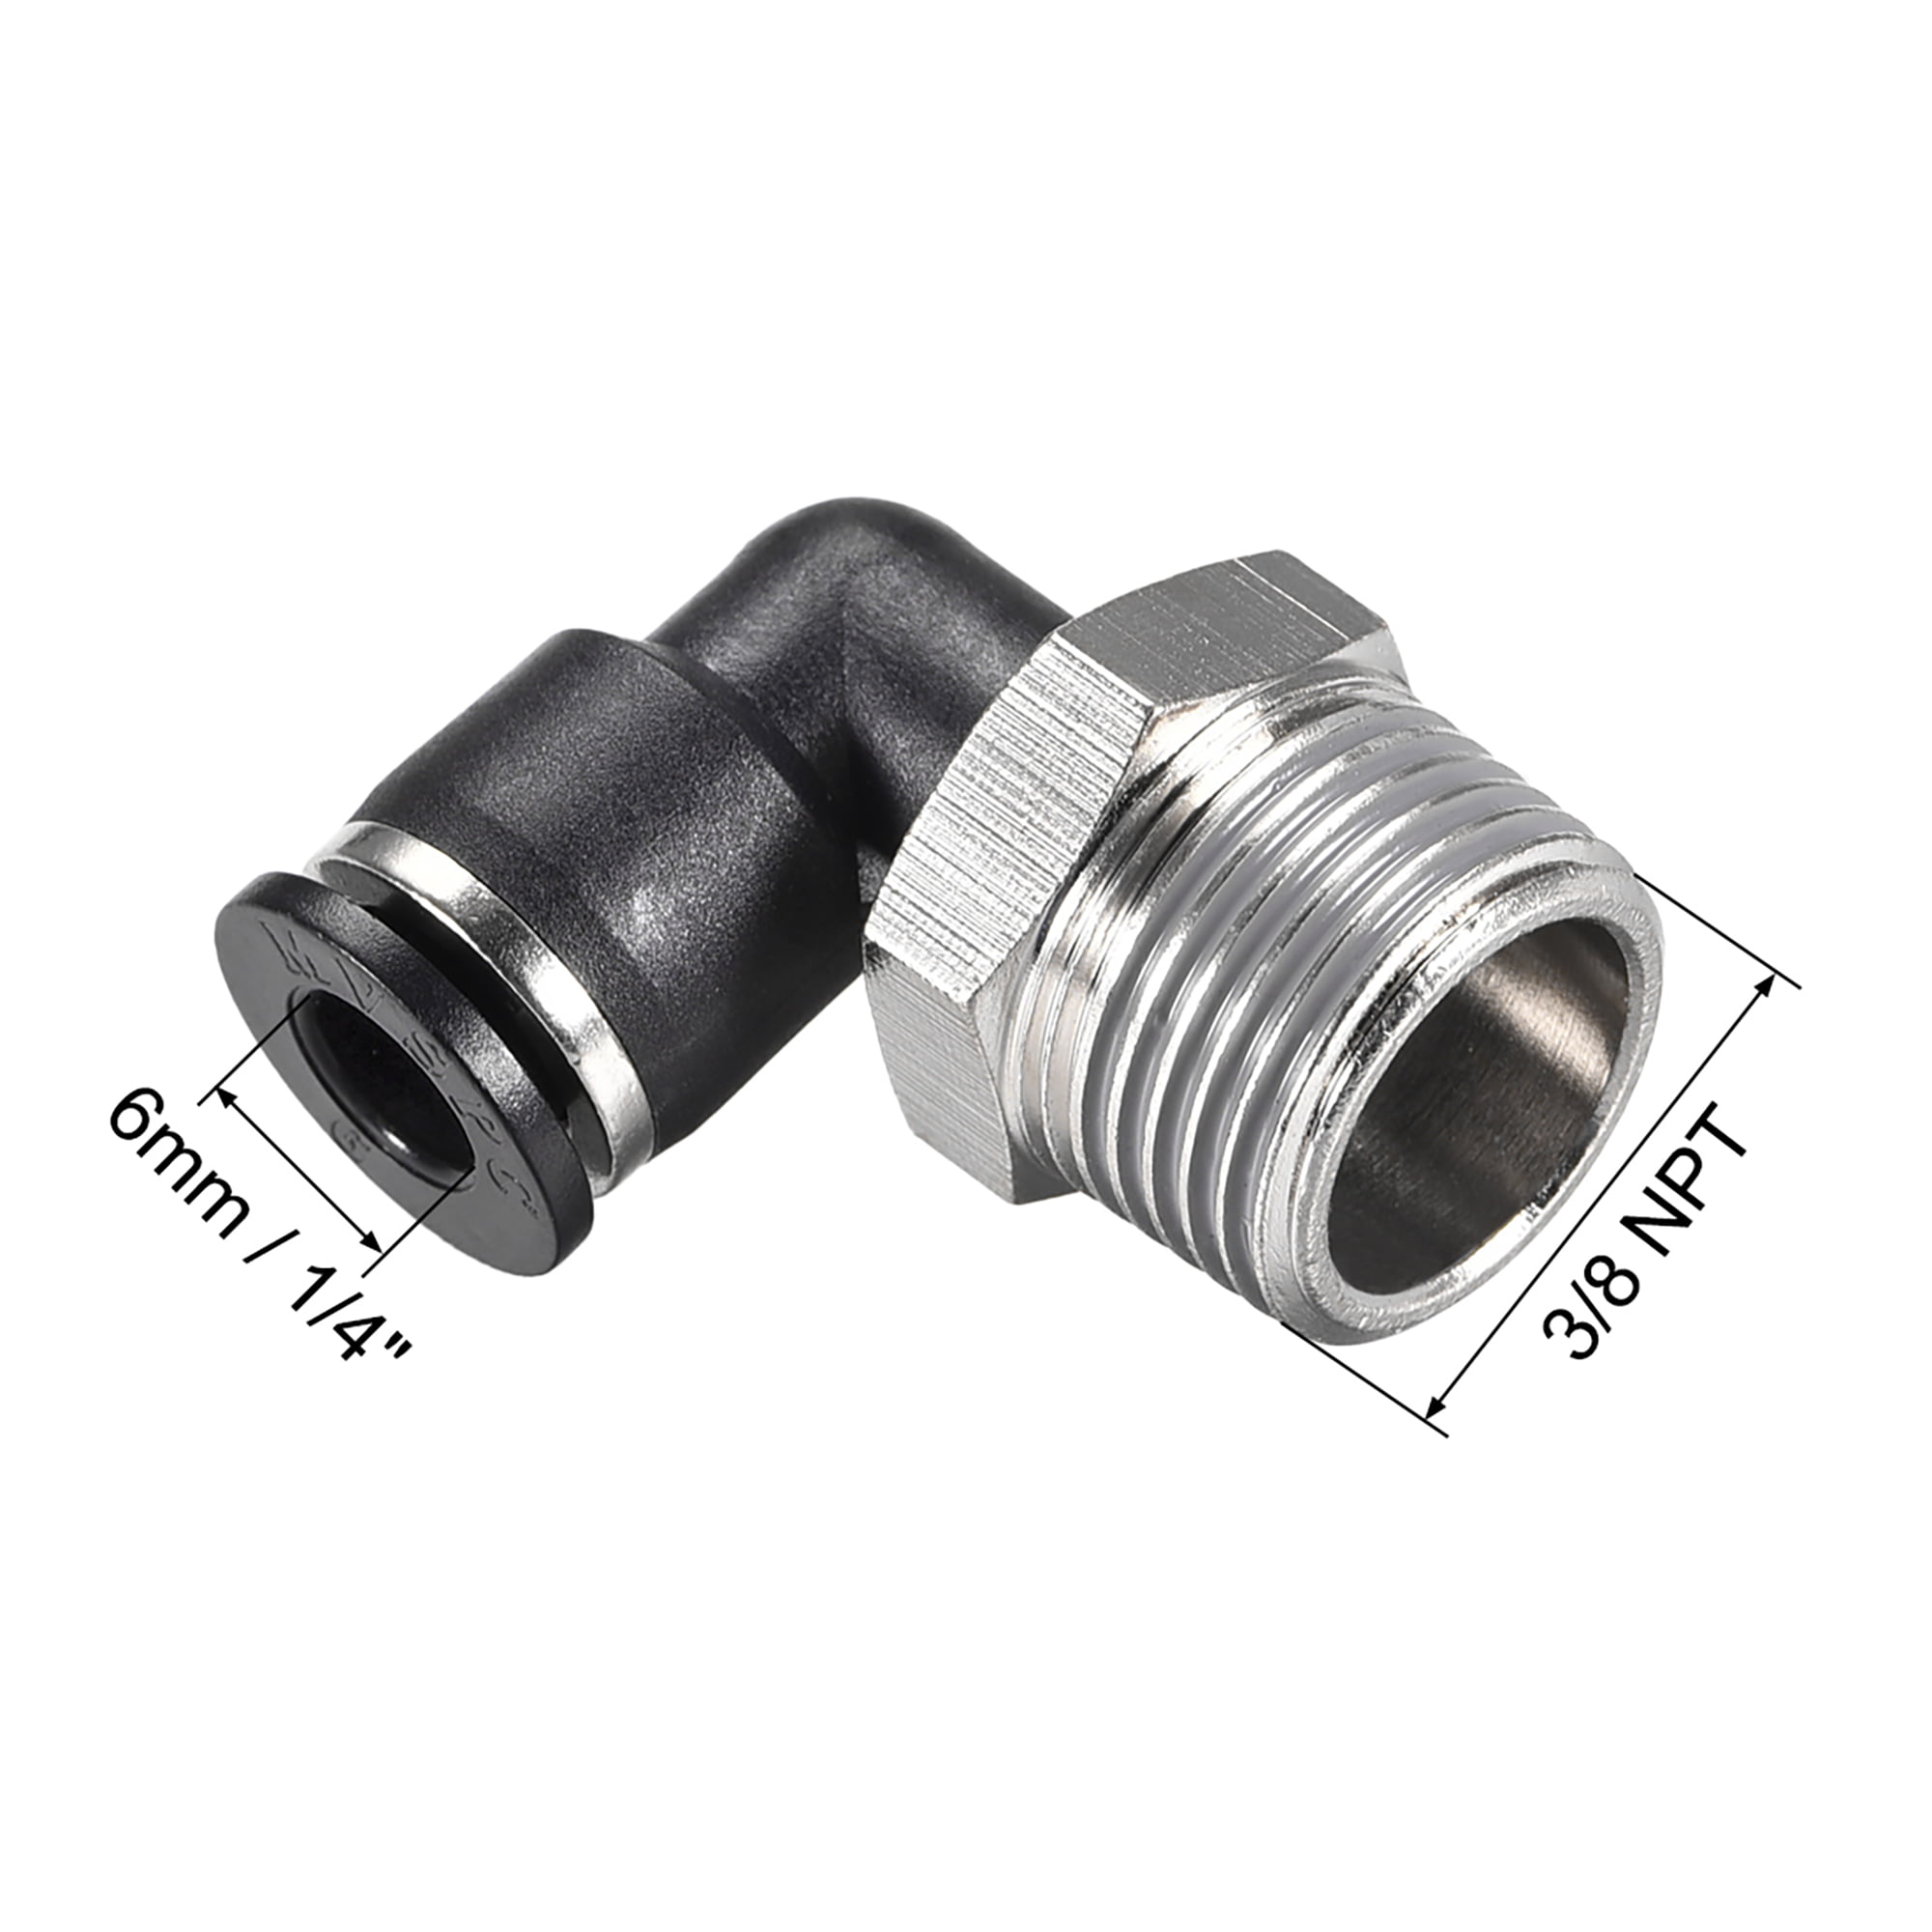 3x TEMCo Pneumatic Air Quick Push to Connect Fitting 1/4" NPT to 3/8" Hose OD 